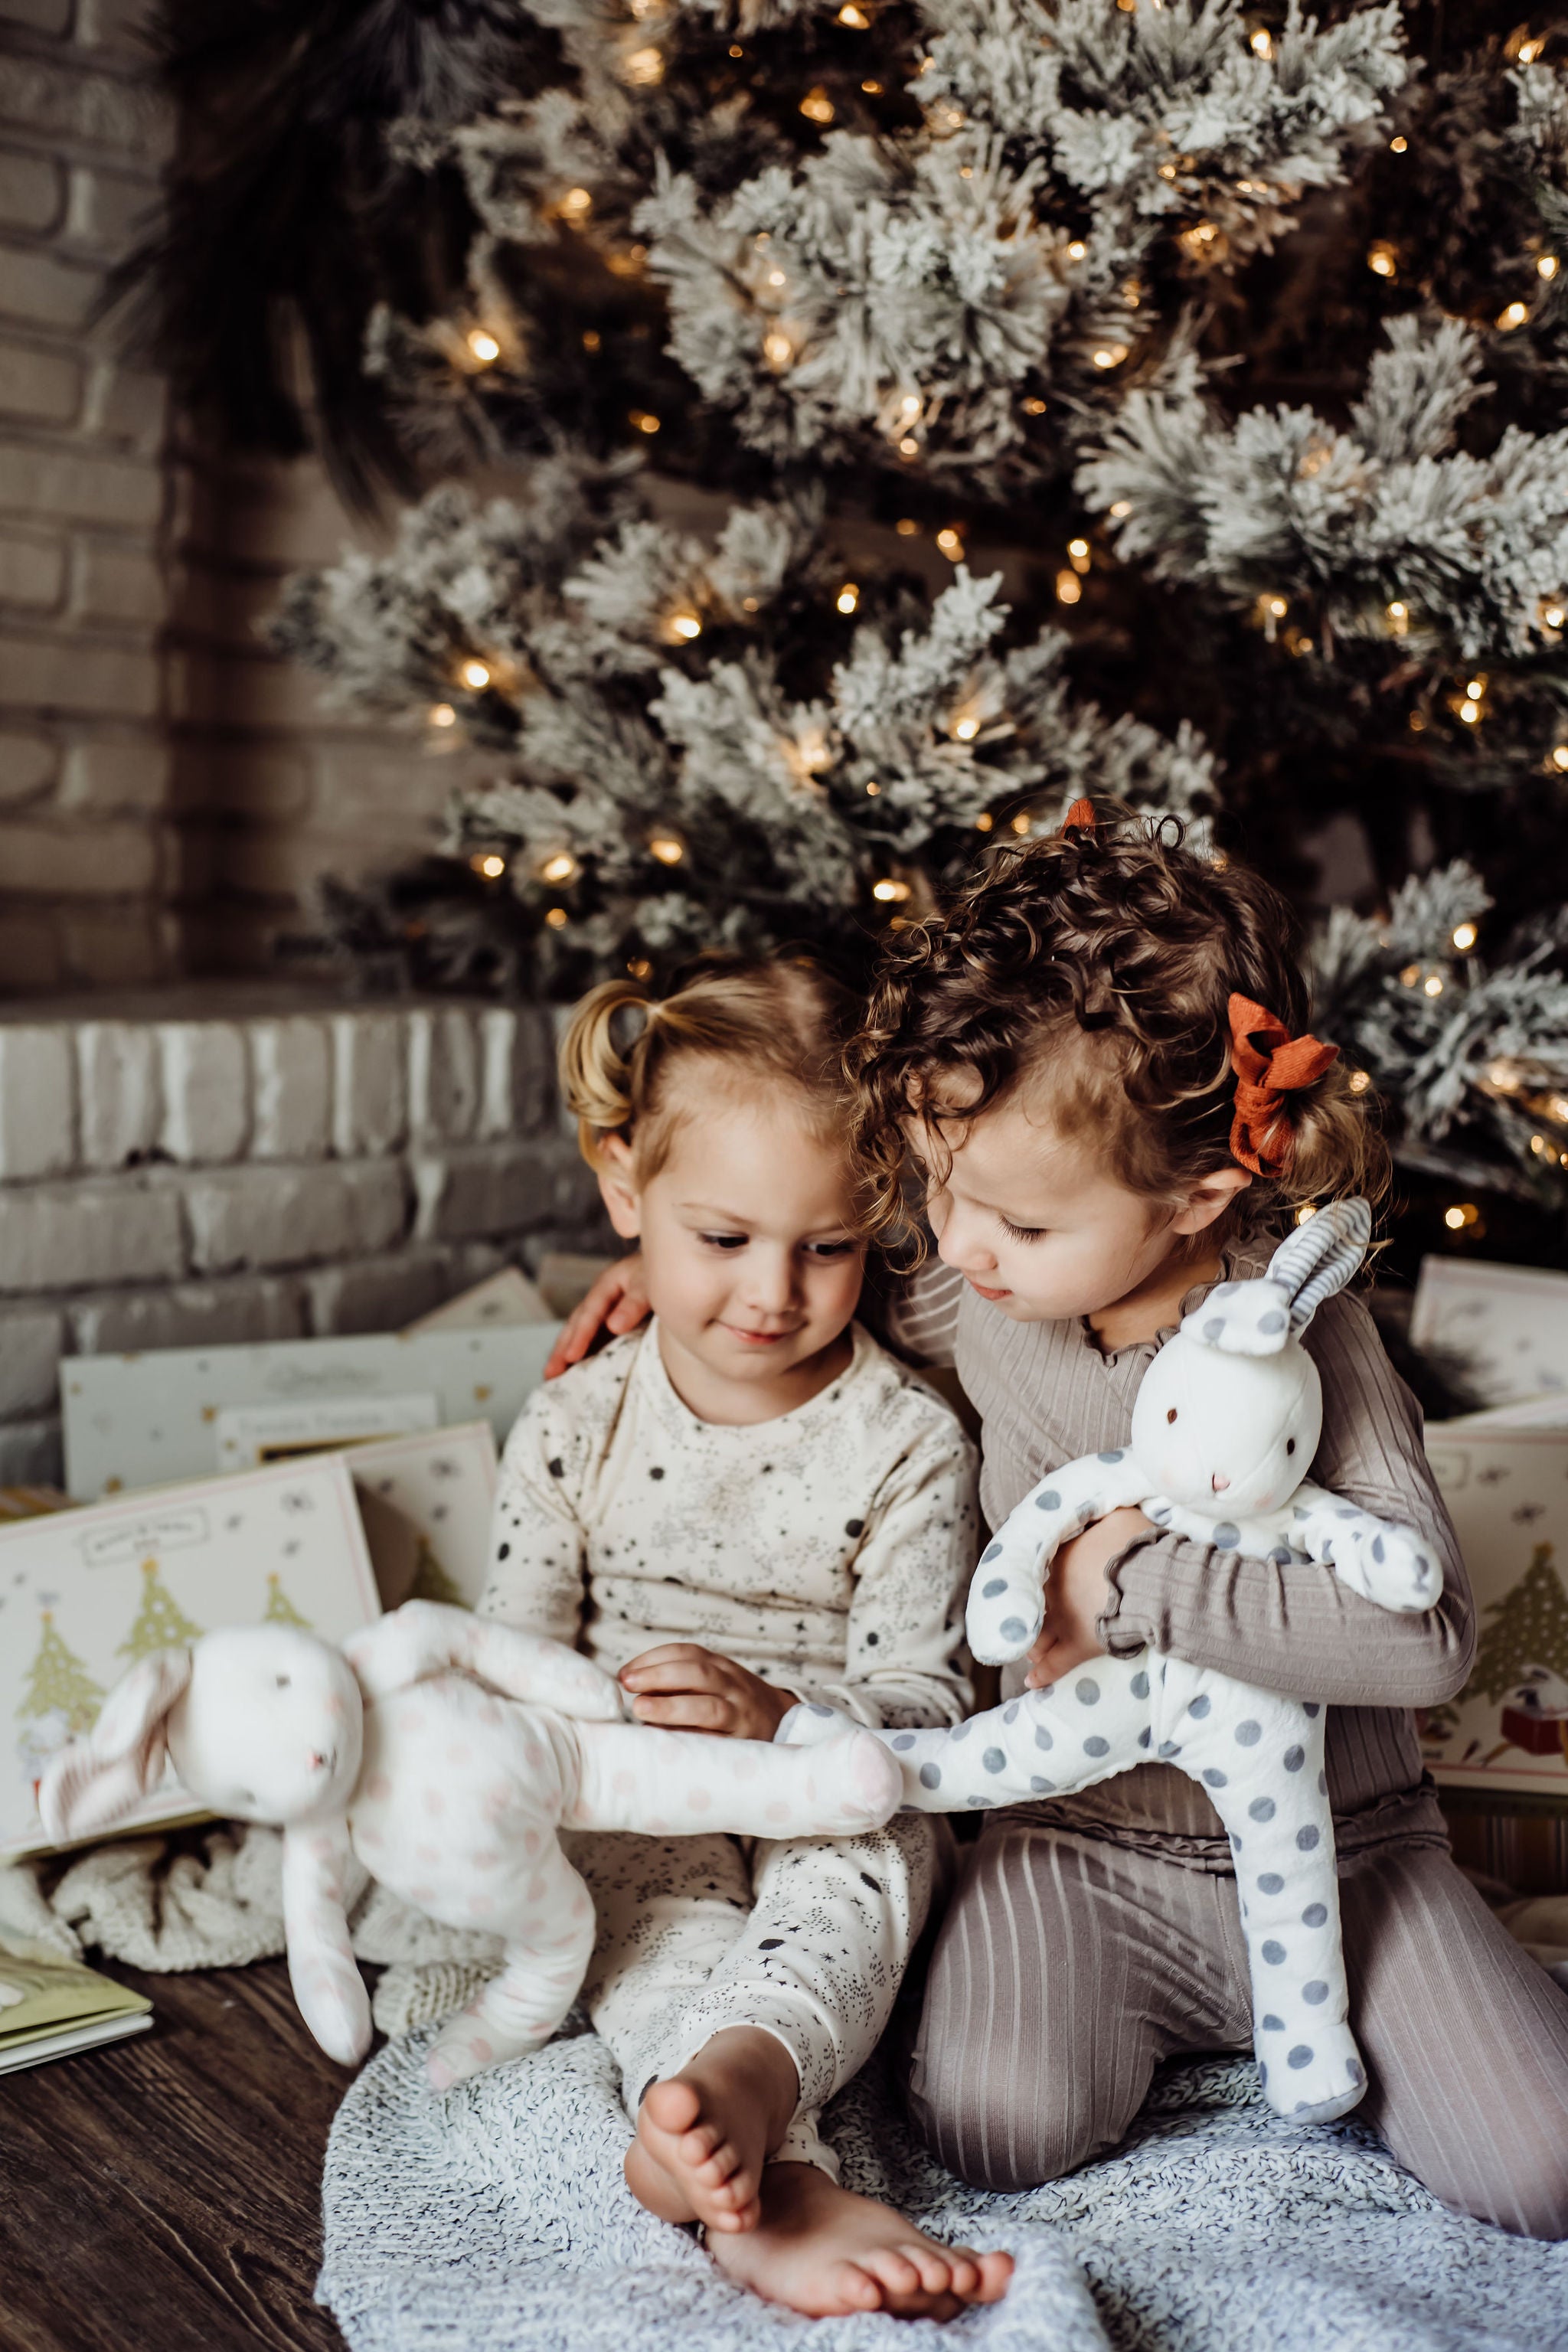 Five Ways to Give Comfort for the Holidays | Blog | Bunnies by the Bay